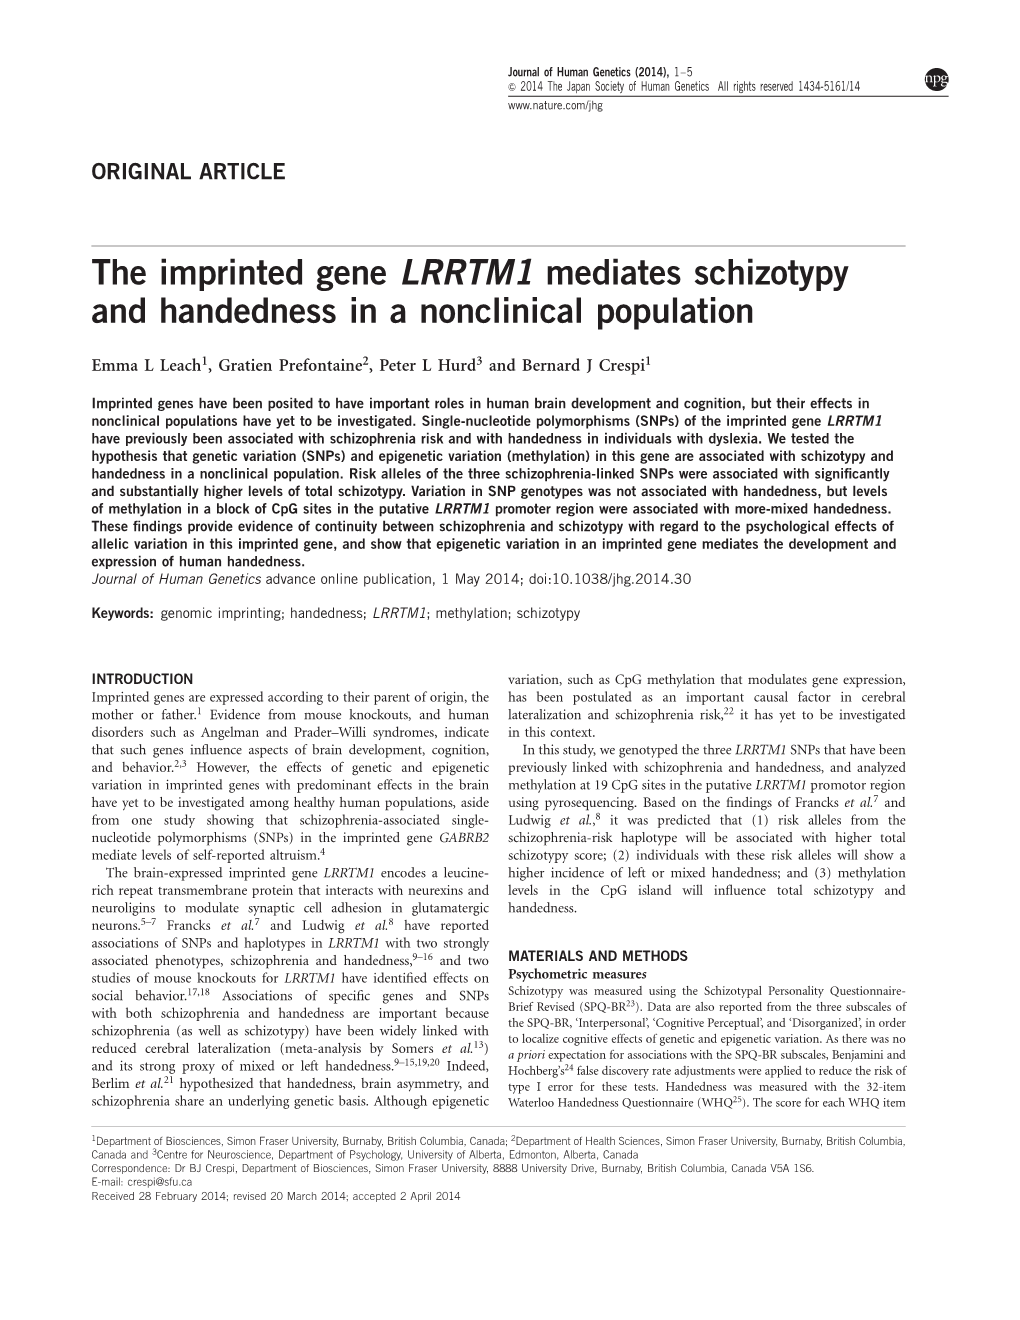 The Imprinted Gene LRRTM1 Mediates Schizotypy and Handedness in a Nonclinical Population